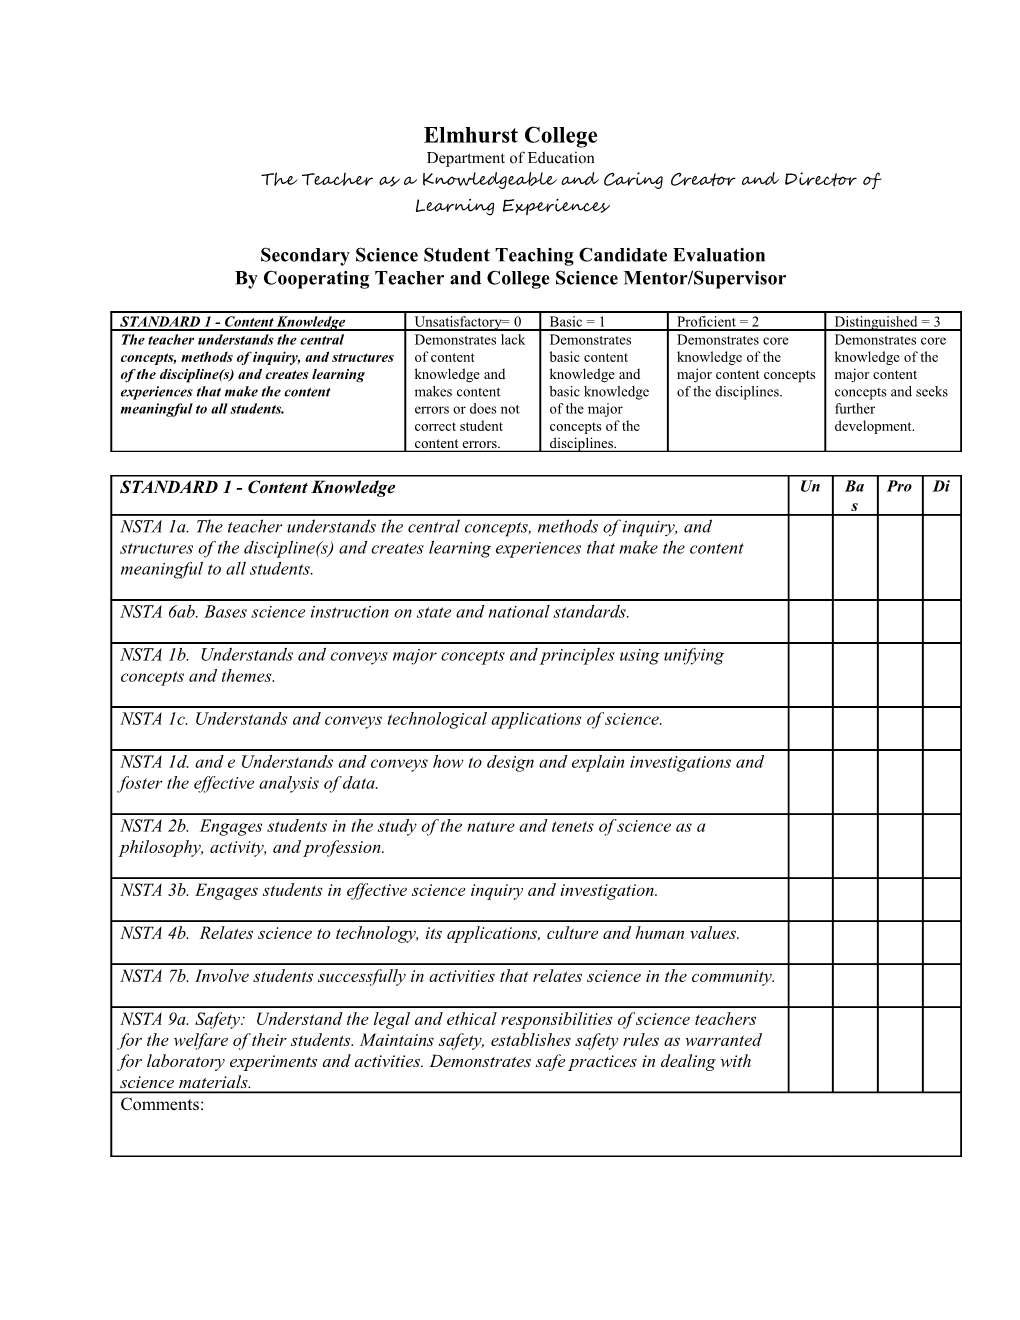 Secondary Science Student Teaching Candidate Evaluation